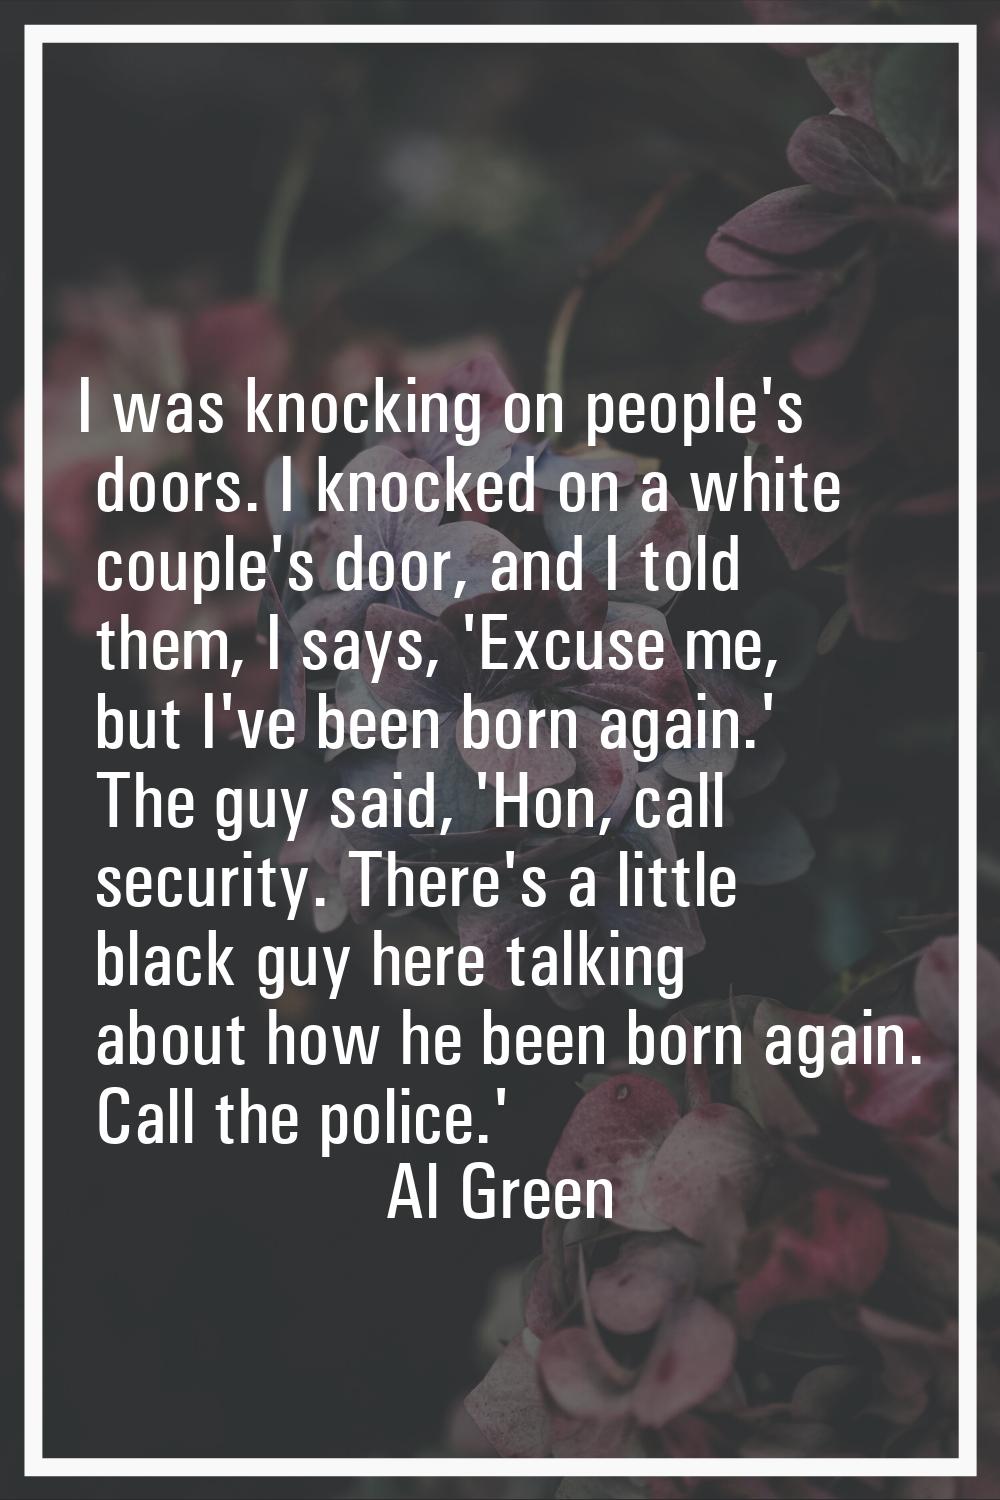 I was knocking on people's doors. I knocked on a white couple's door, and I told them, I says, 'Exc